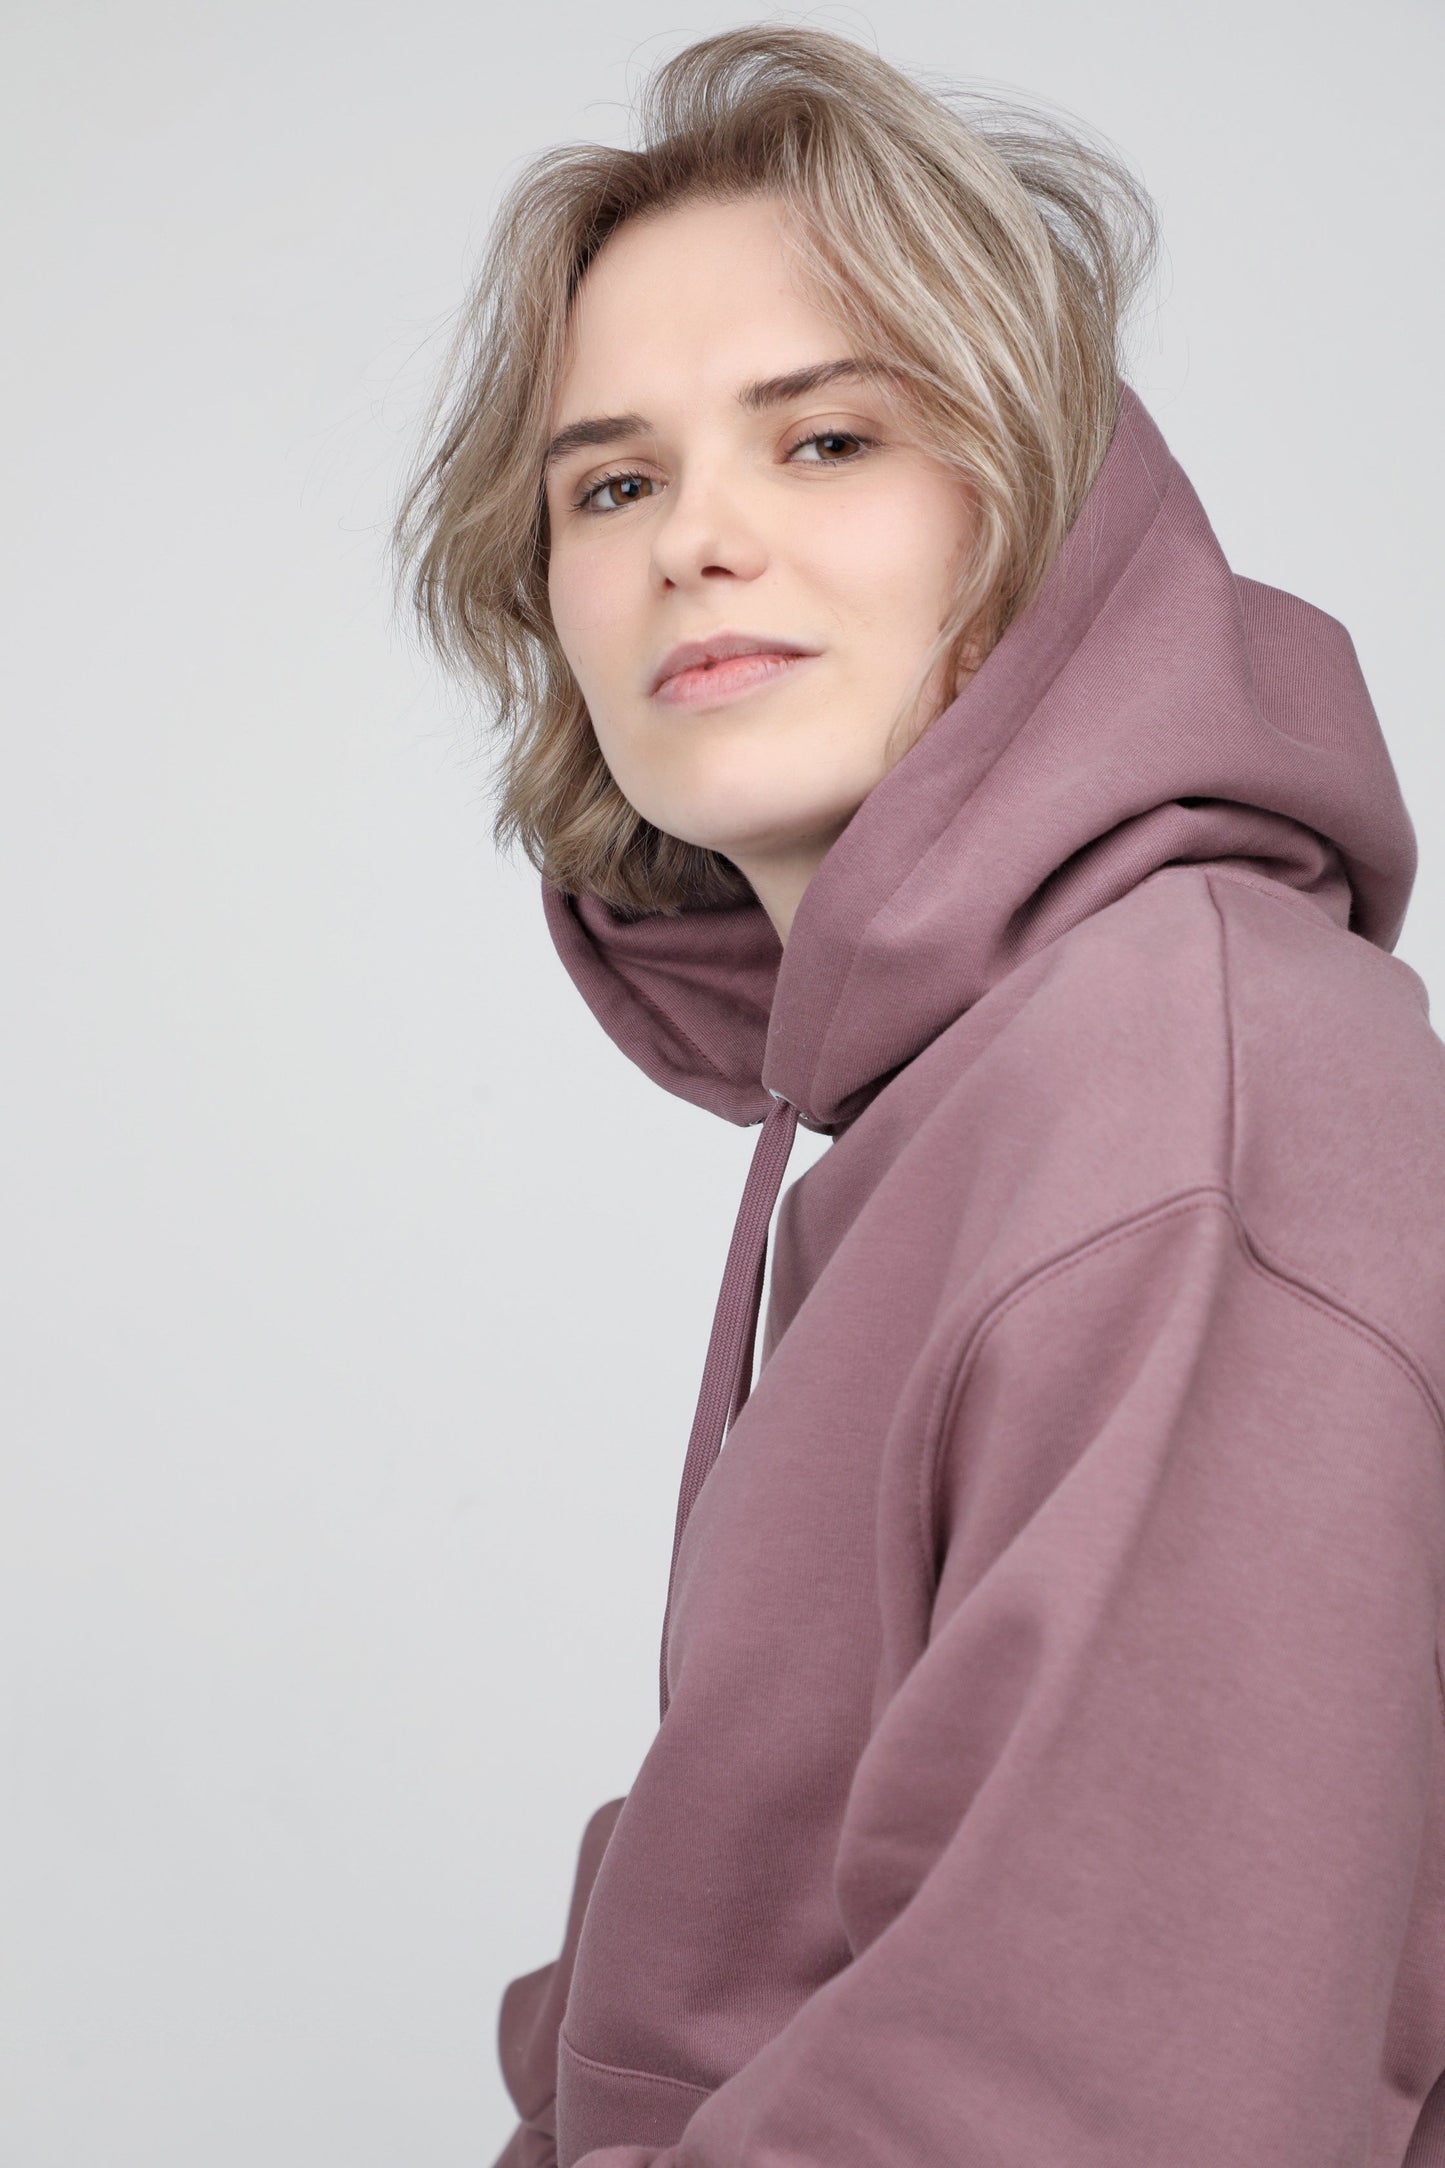 Comme ci comme ca | Hoodie with embroidered dog. Oversize fit | Unisex - premium dog goods handmade in Europe by animalistus